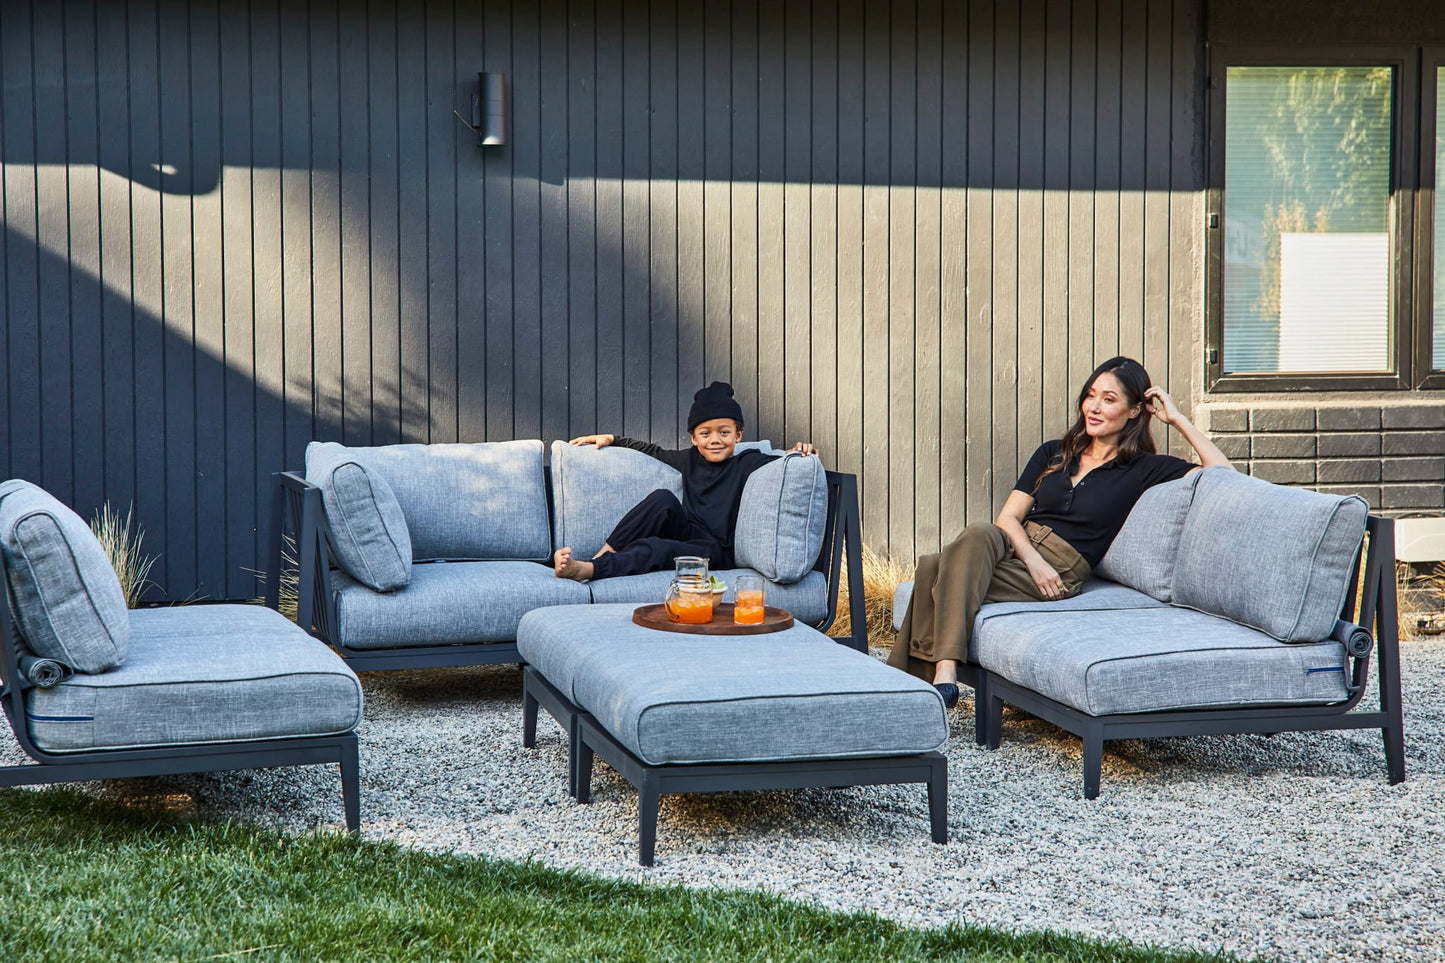 Live Outer 98" Charcoal Aluminum Outdoor Sofa With Armless Chairs and Pacific Fog Gray Cushion (5-Seat)